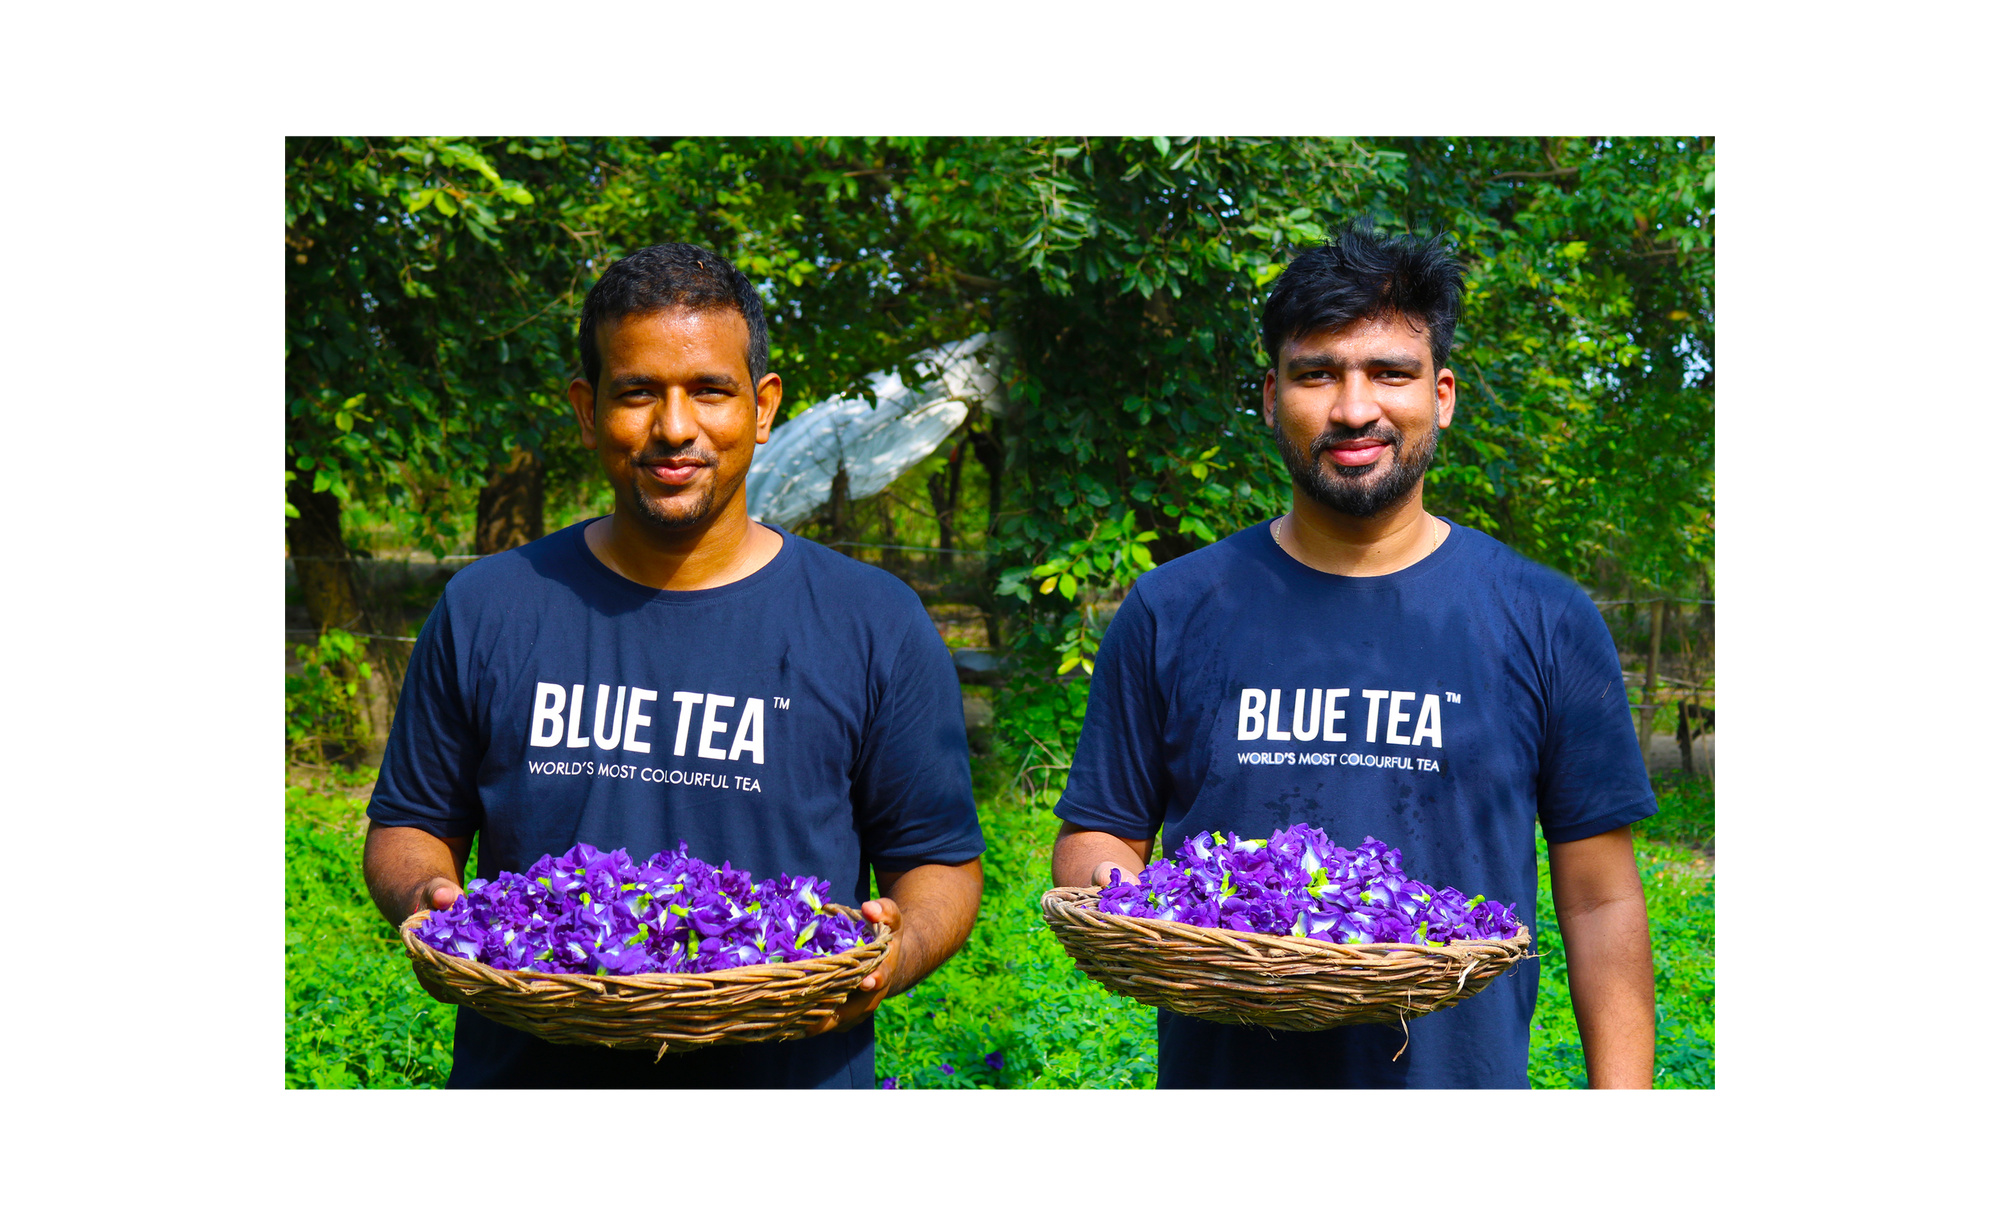 We Offer Health In Every Sip - Blue Tea